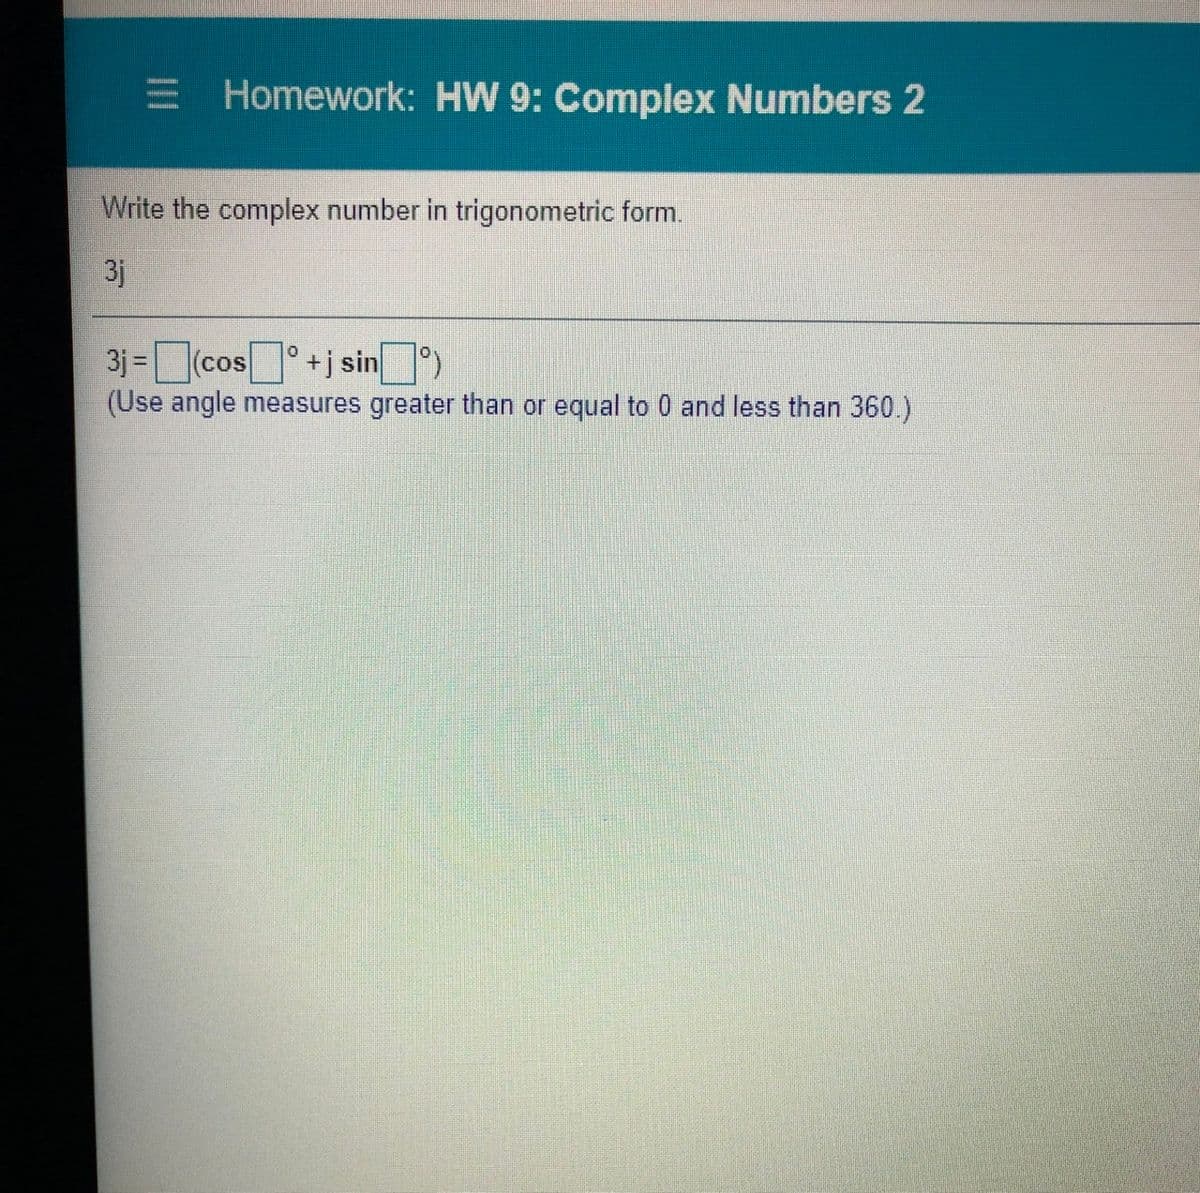 E Homework: HW 9: Complex Numbers 2
Write the complex number in trigonometric form.
3j
3j =cos+jsin)
(Use angle measures greater than or equal to 0 and less than 360.)
